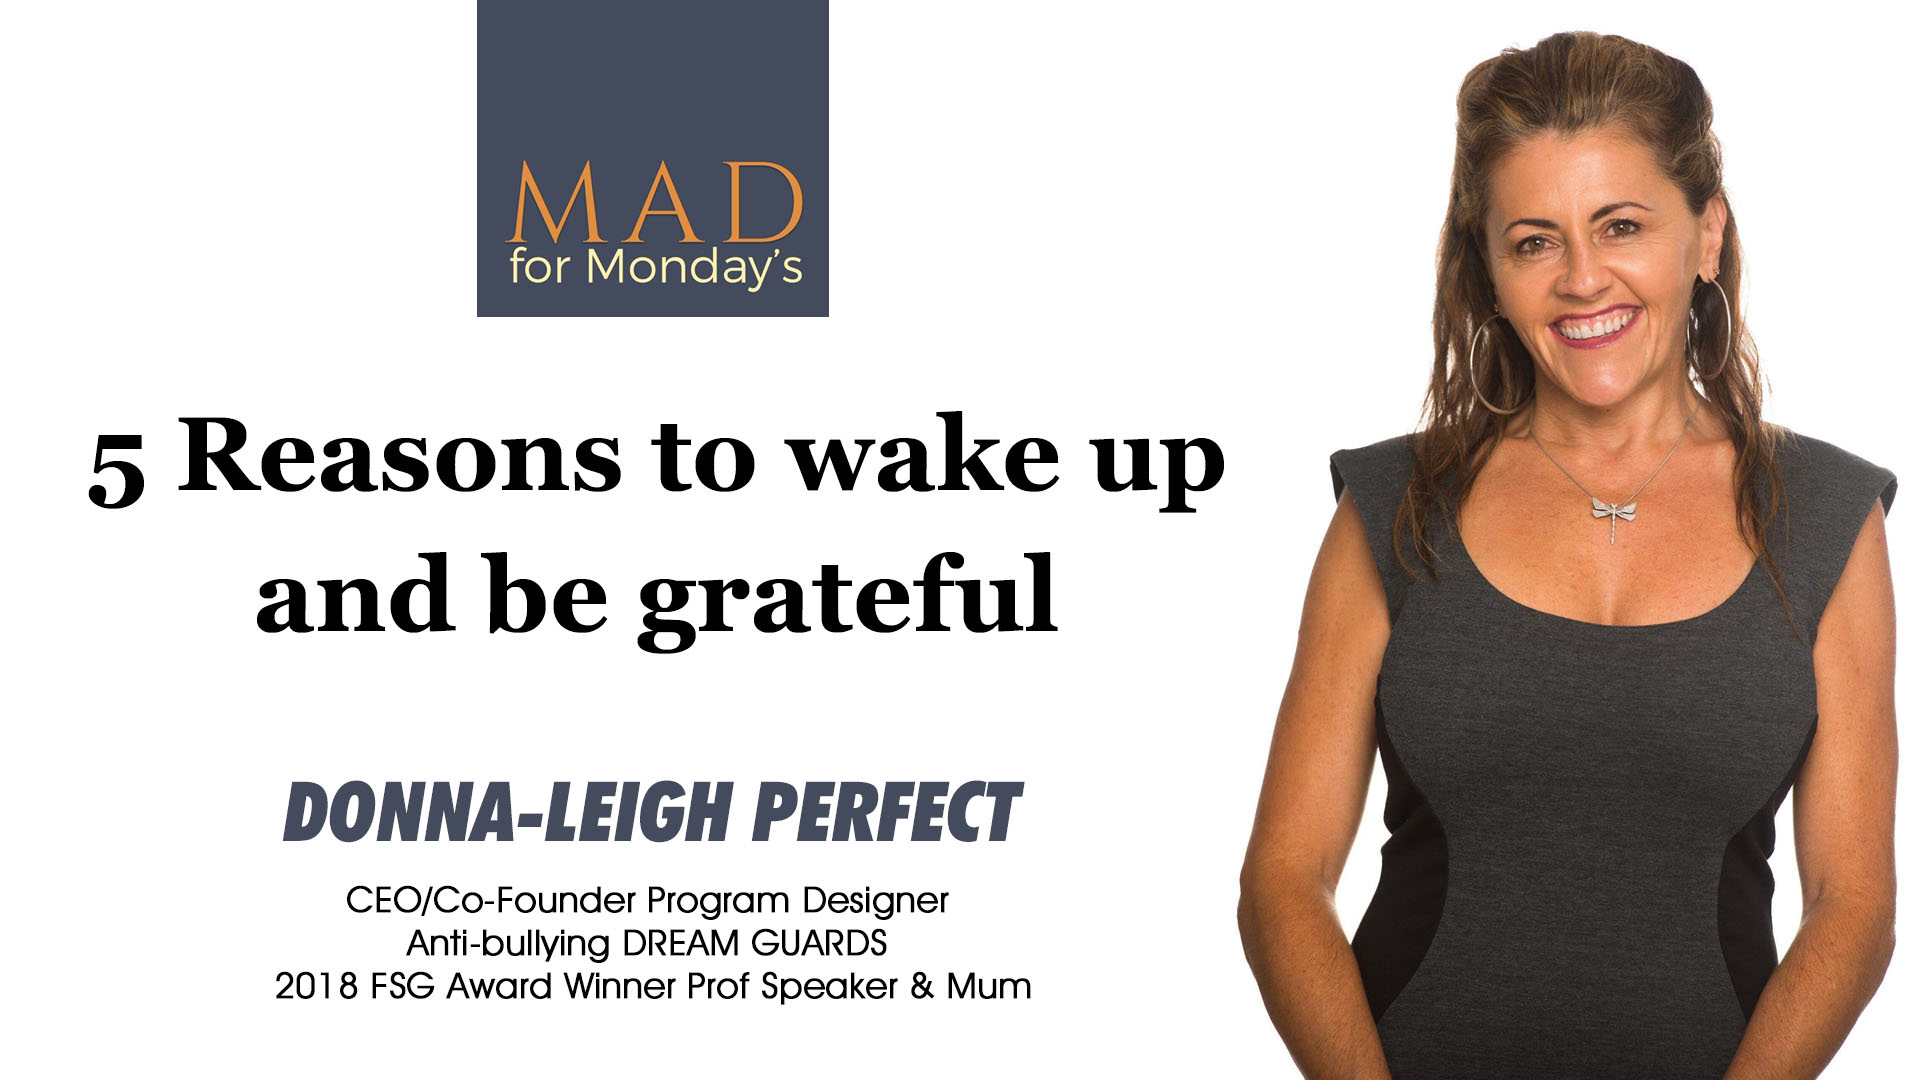 M.A.D. for Mondays – 5 Reasons to wake up and be grateful